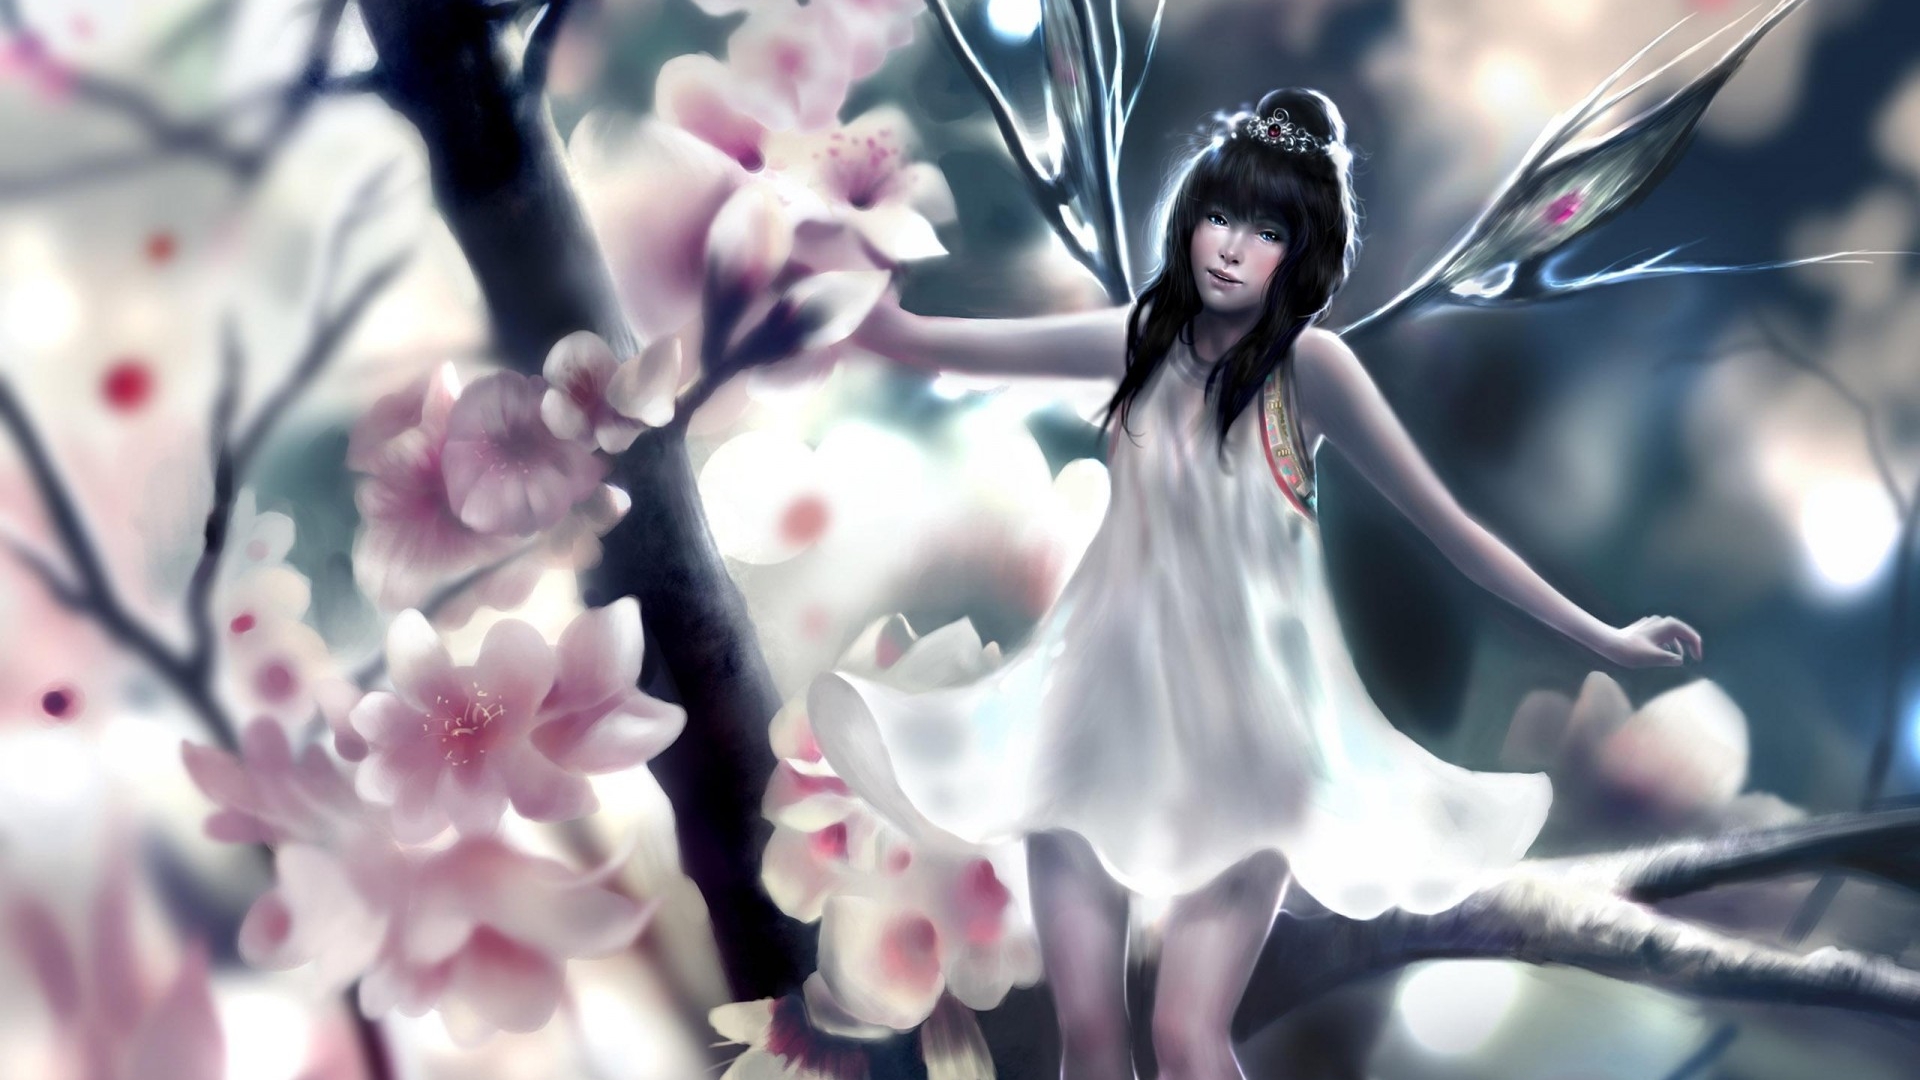 Fairy Wallpapers HD 